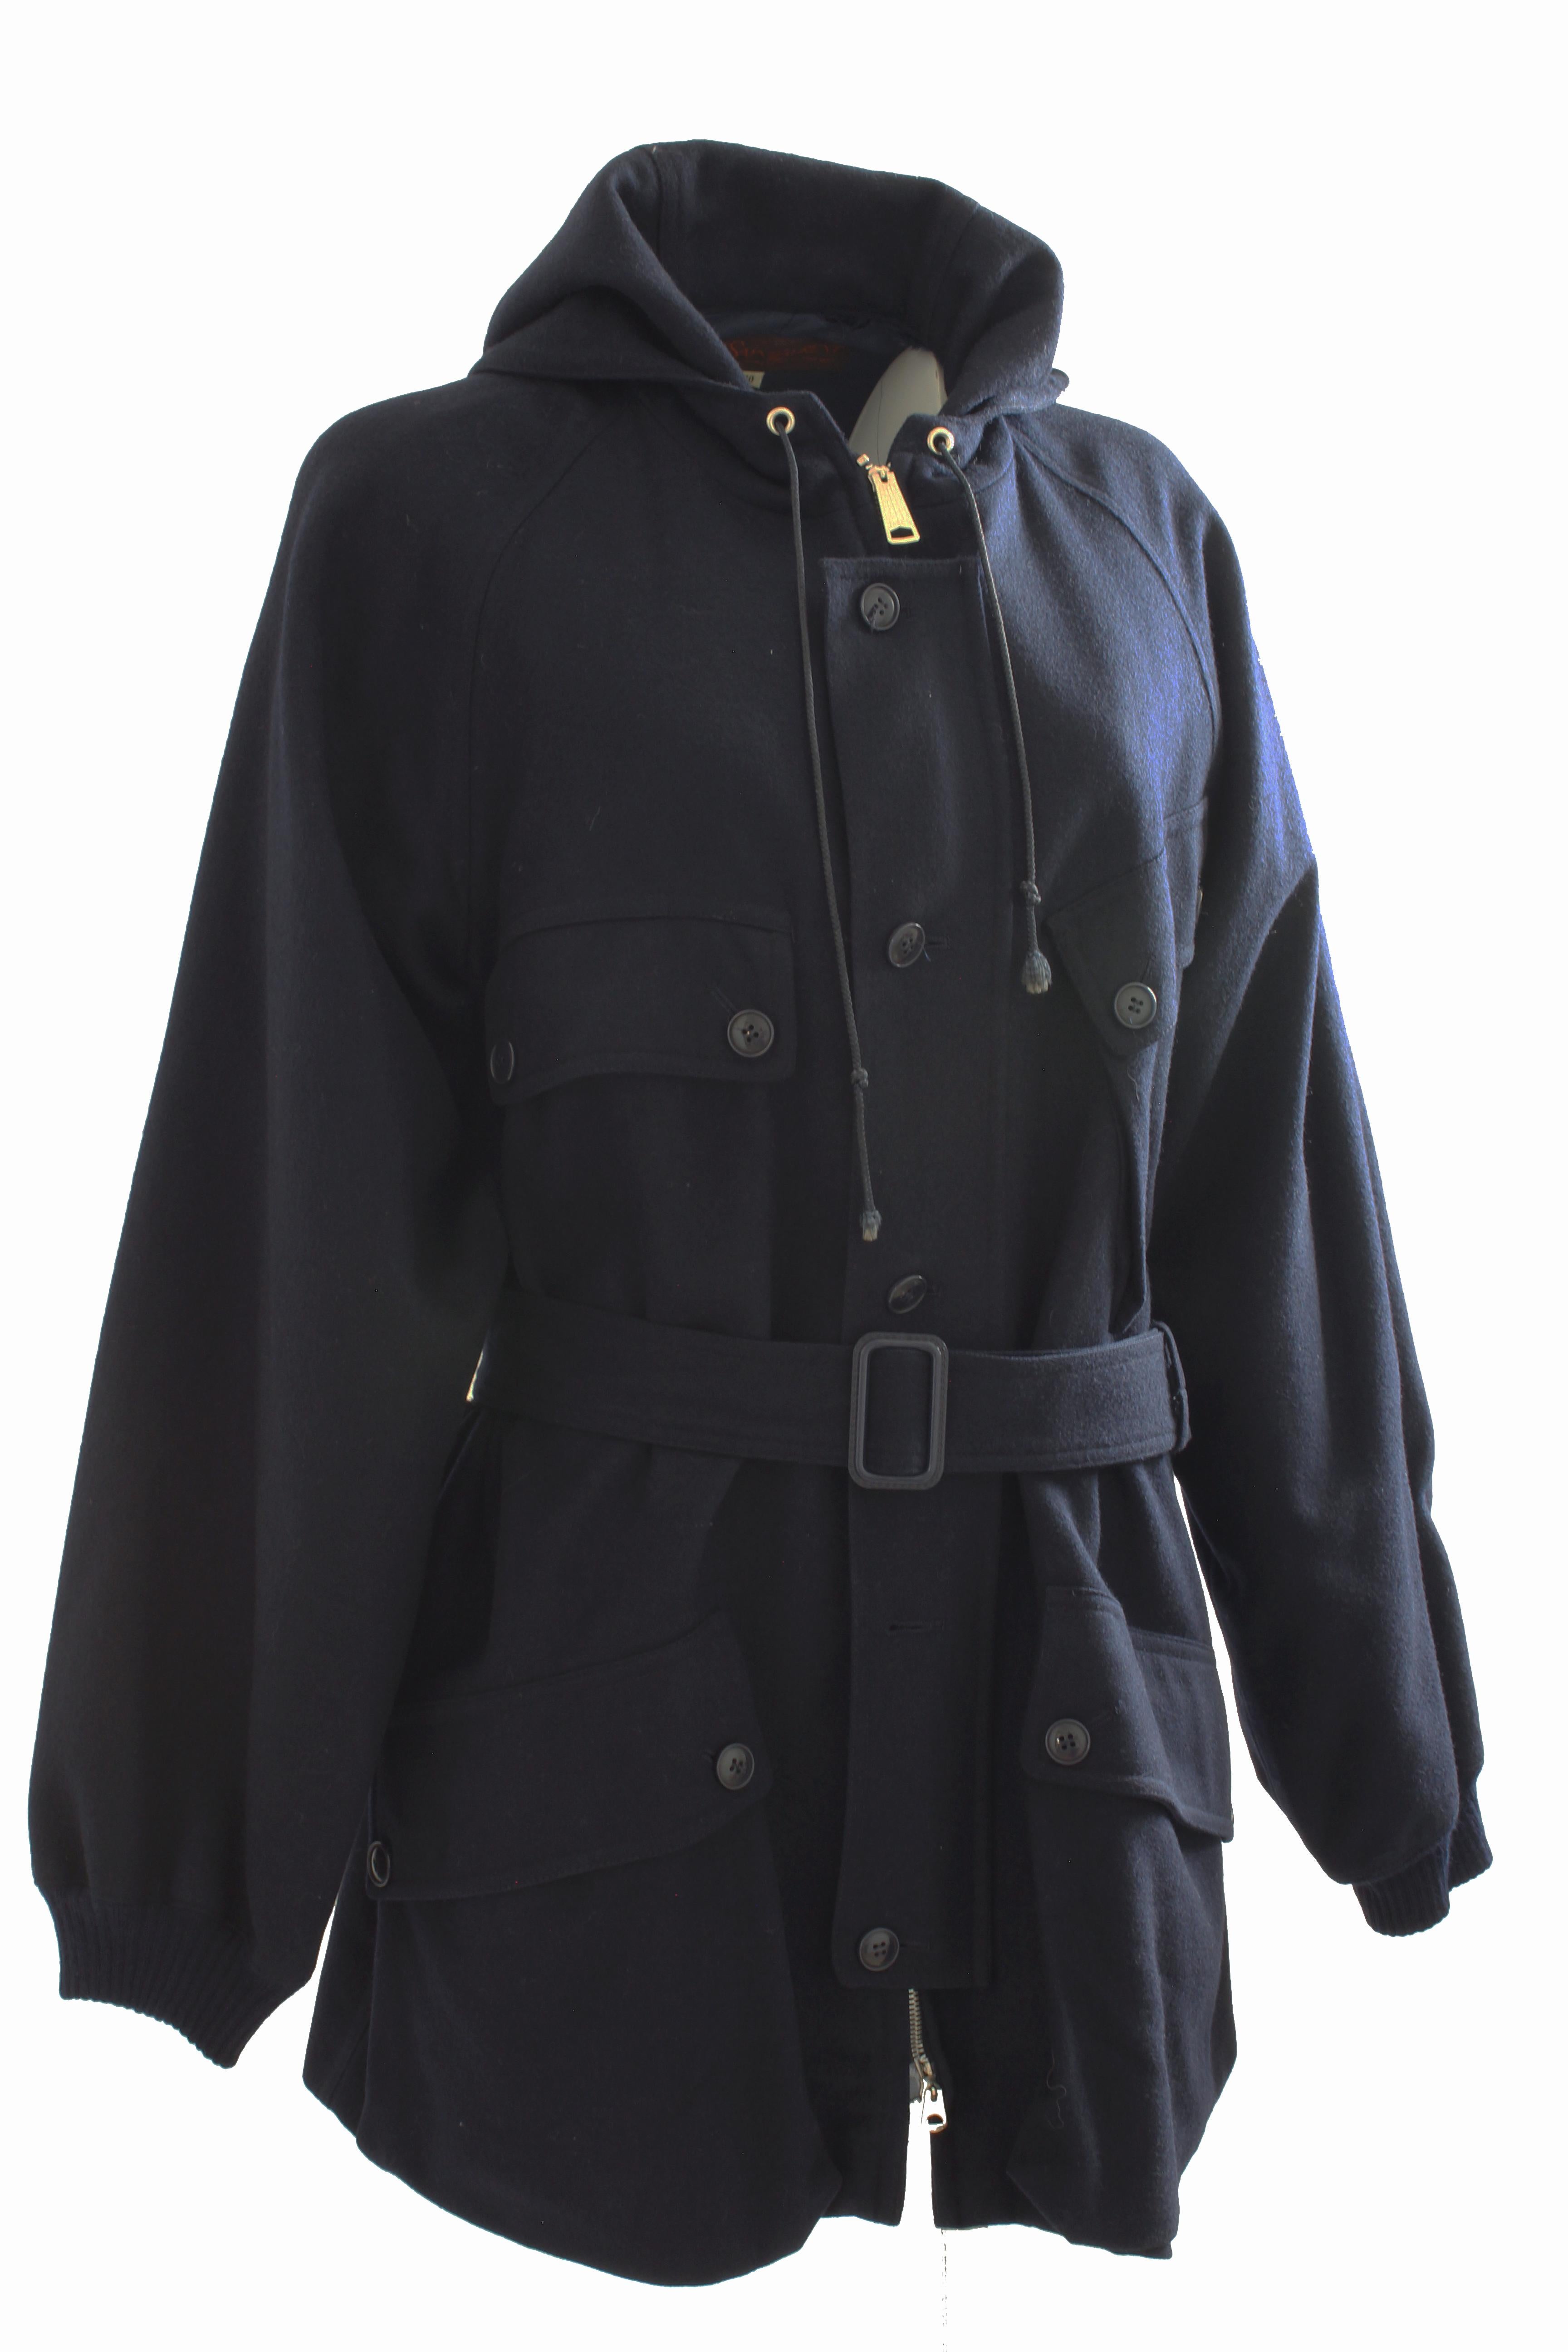 This classic hooded coat with belt was made by Yves Saint Laurent, most likely in the late 1970s. Made from navy wool, it features a metal zipper with a buttoned flap over the placket, four pockets and knit sleeve ends to protect against the